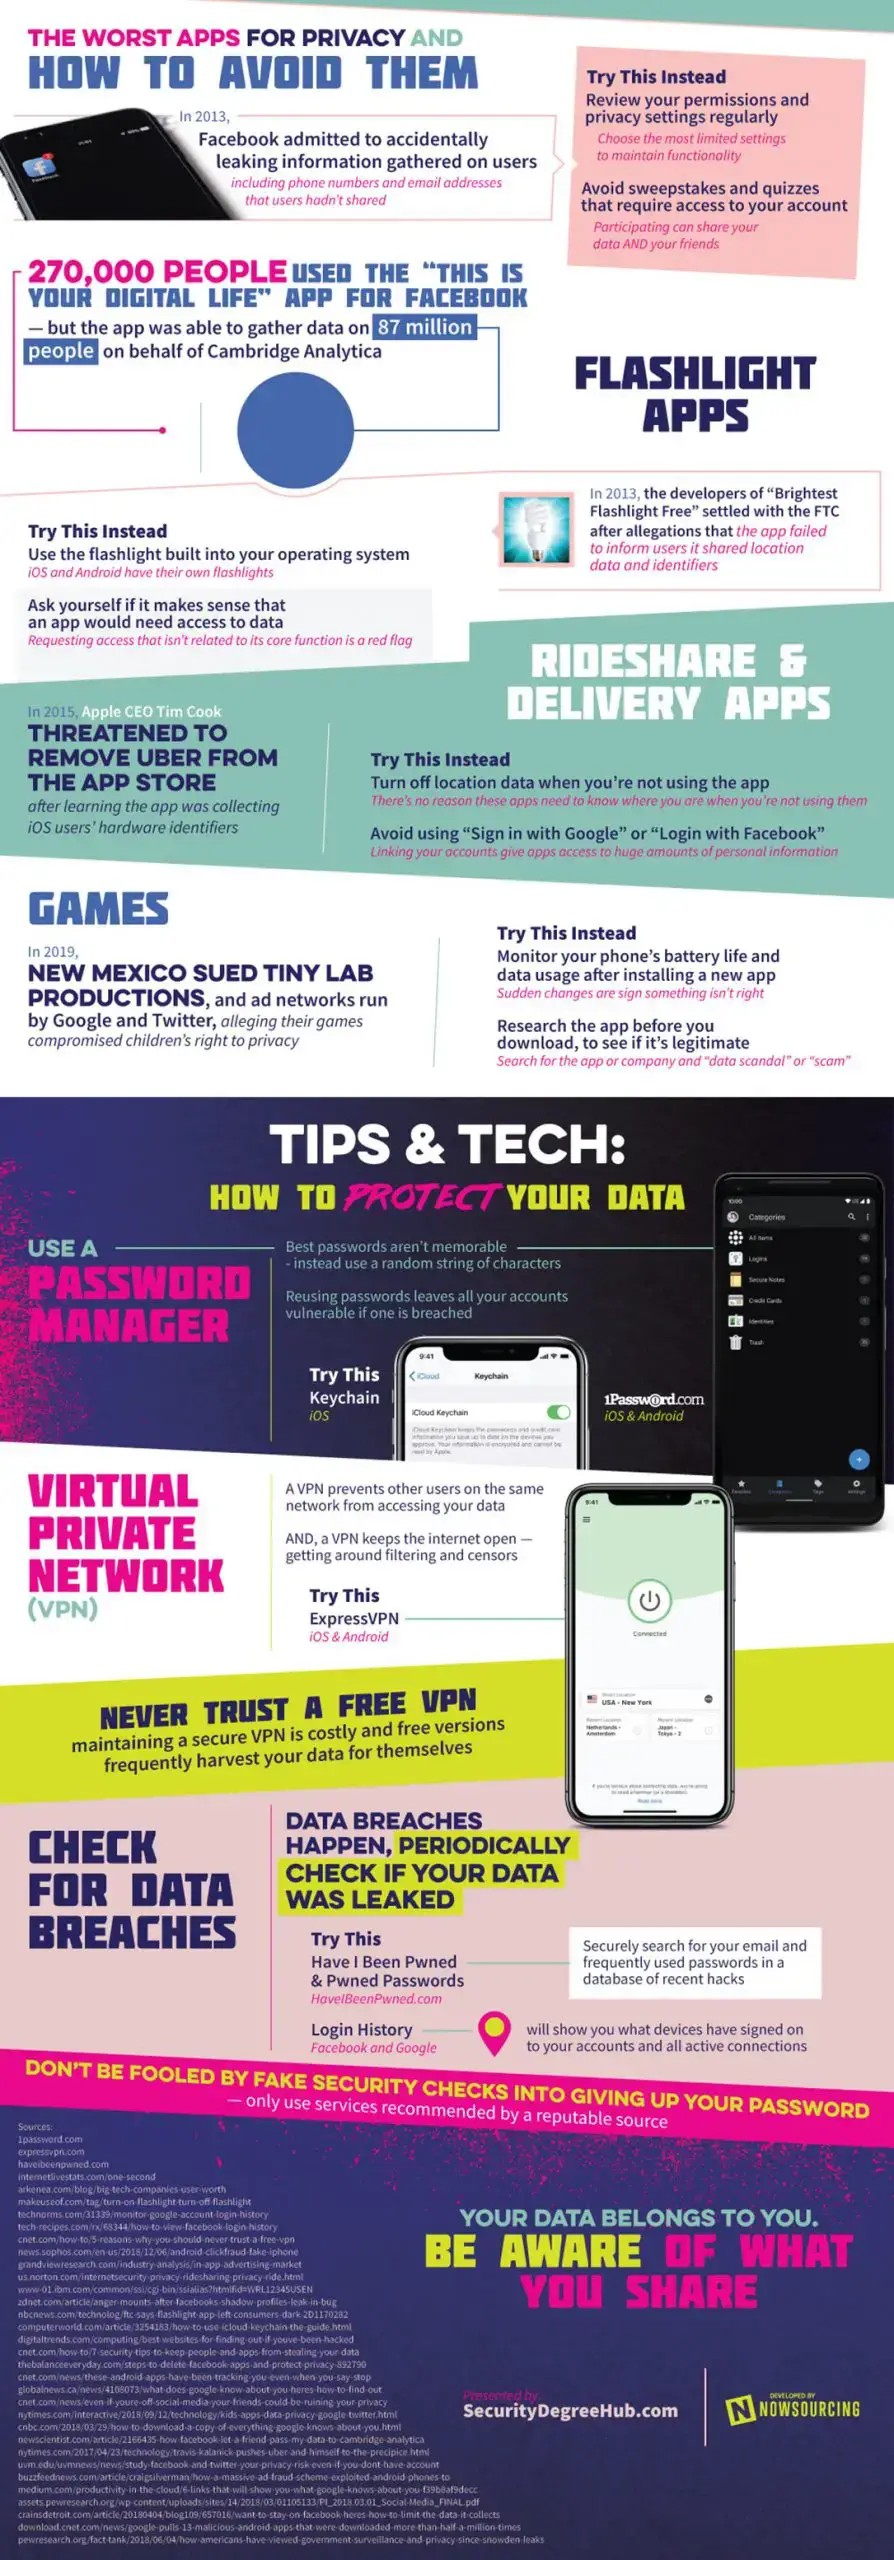 smartphone infographic apps and privacy